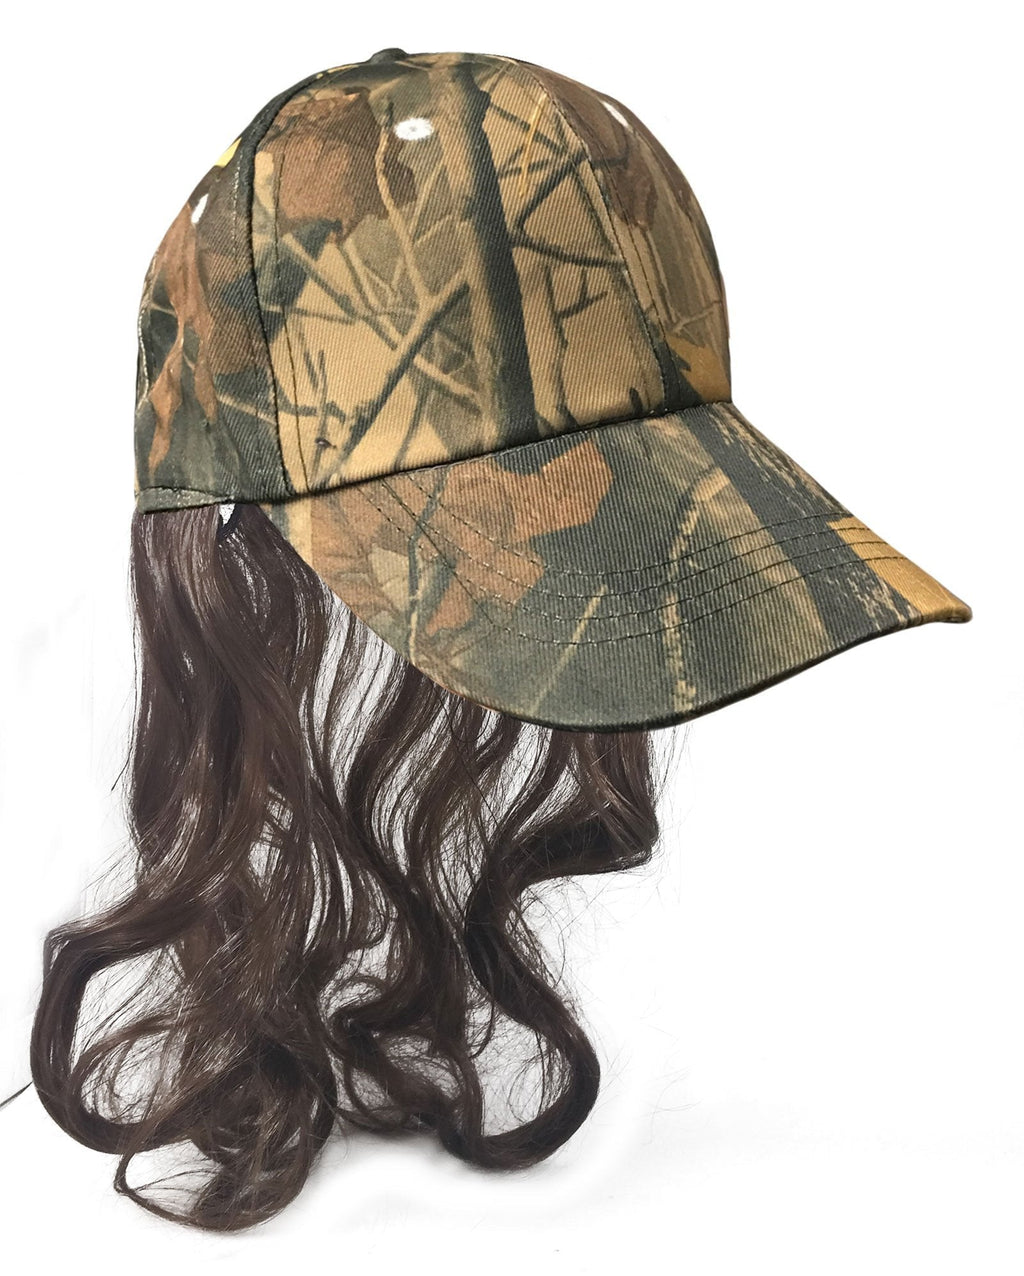 [Australia] - Camouflage Billy Ray Hat with Brown Mullet Hair! Bed Head, Don't Care! Now You Have The Perfect Hat to Cover The Mess Even in The Deer Stand! 